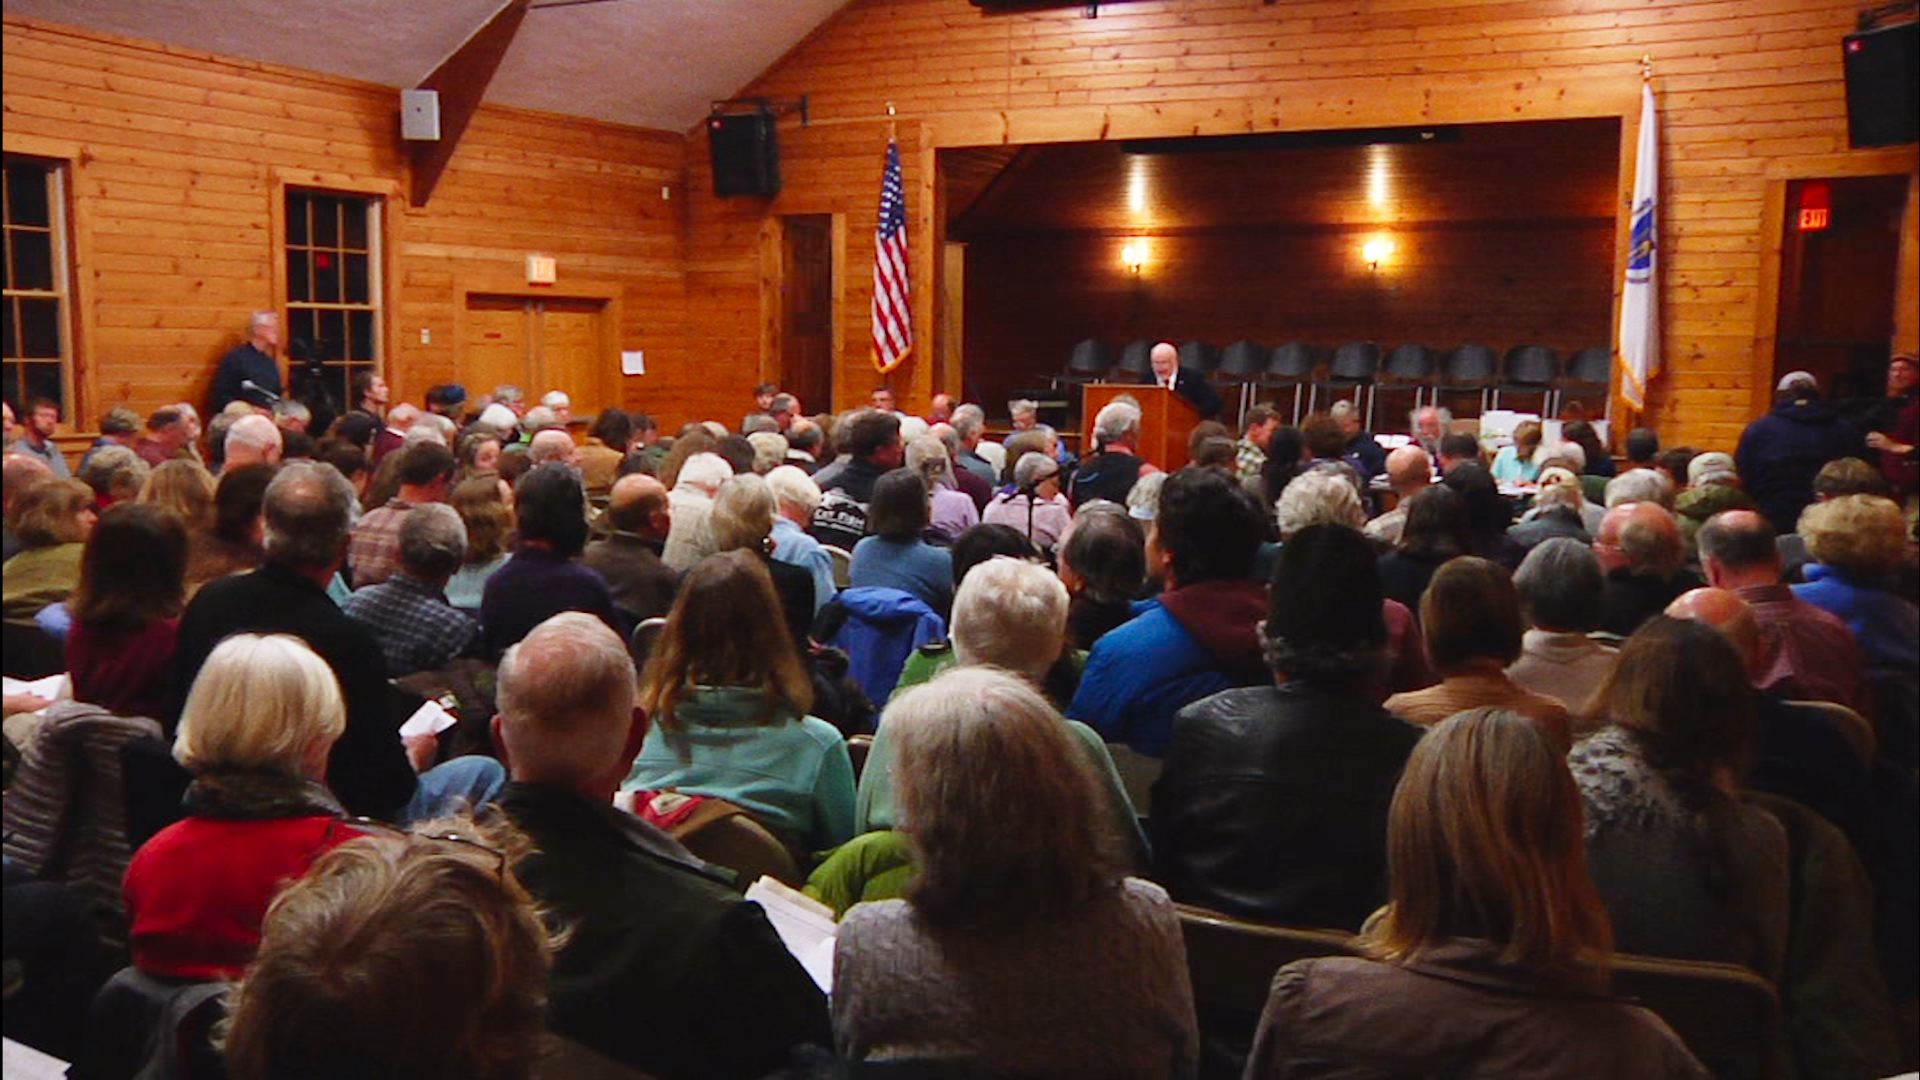 Chilmark's town meeting where a bylaw limiting house size was voted on